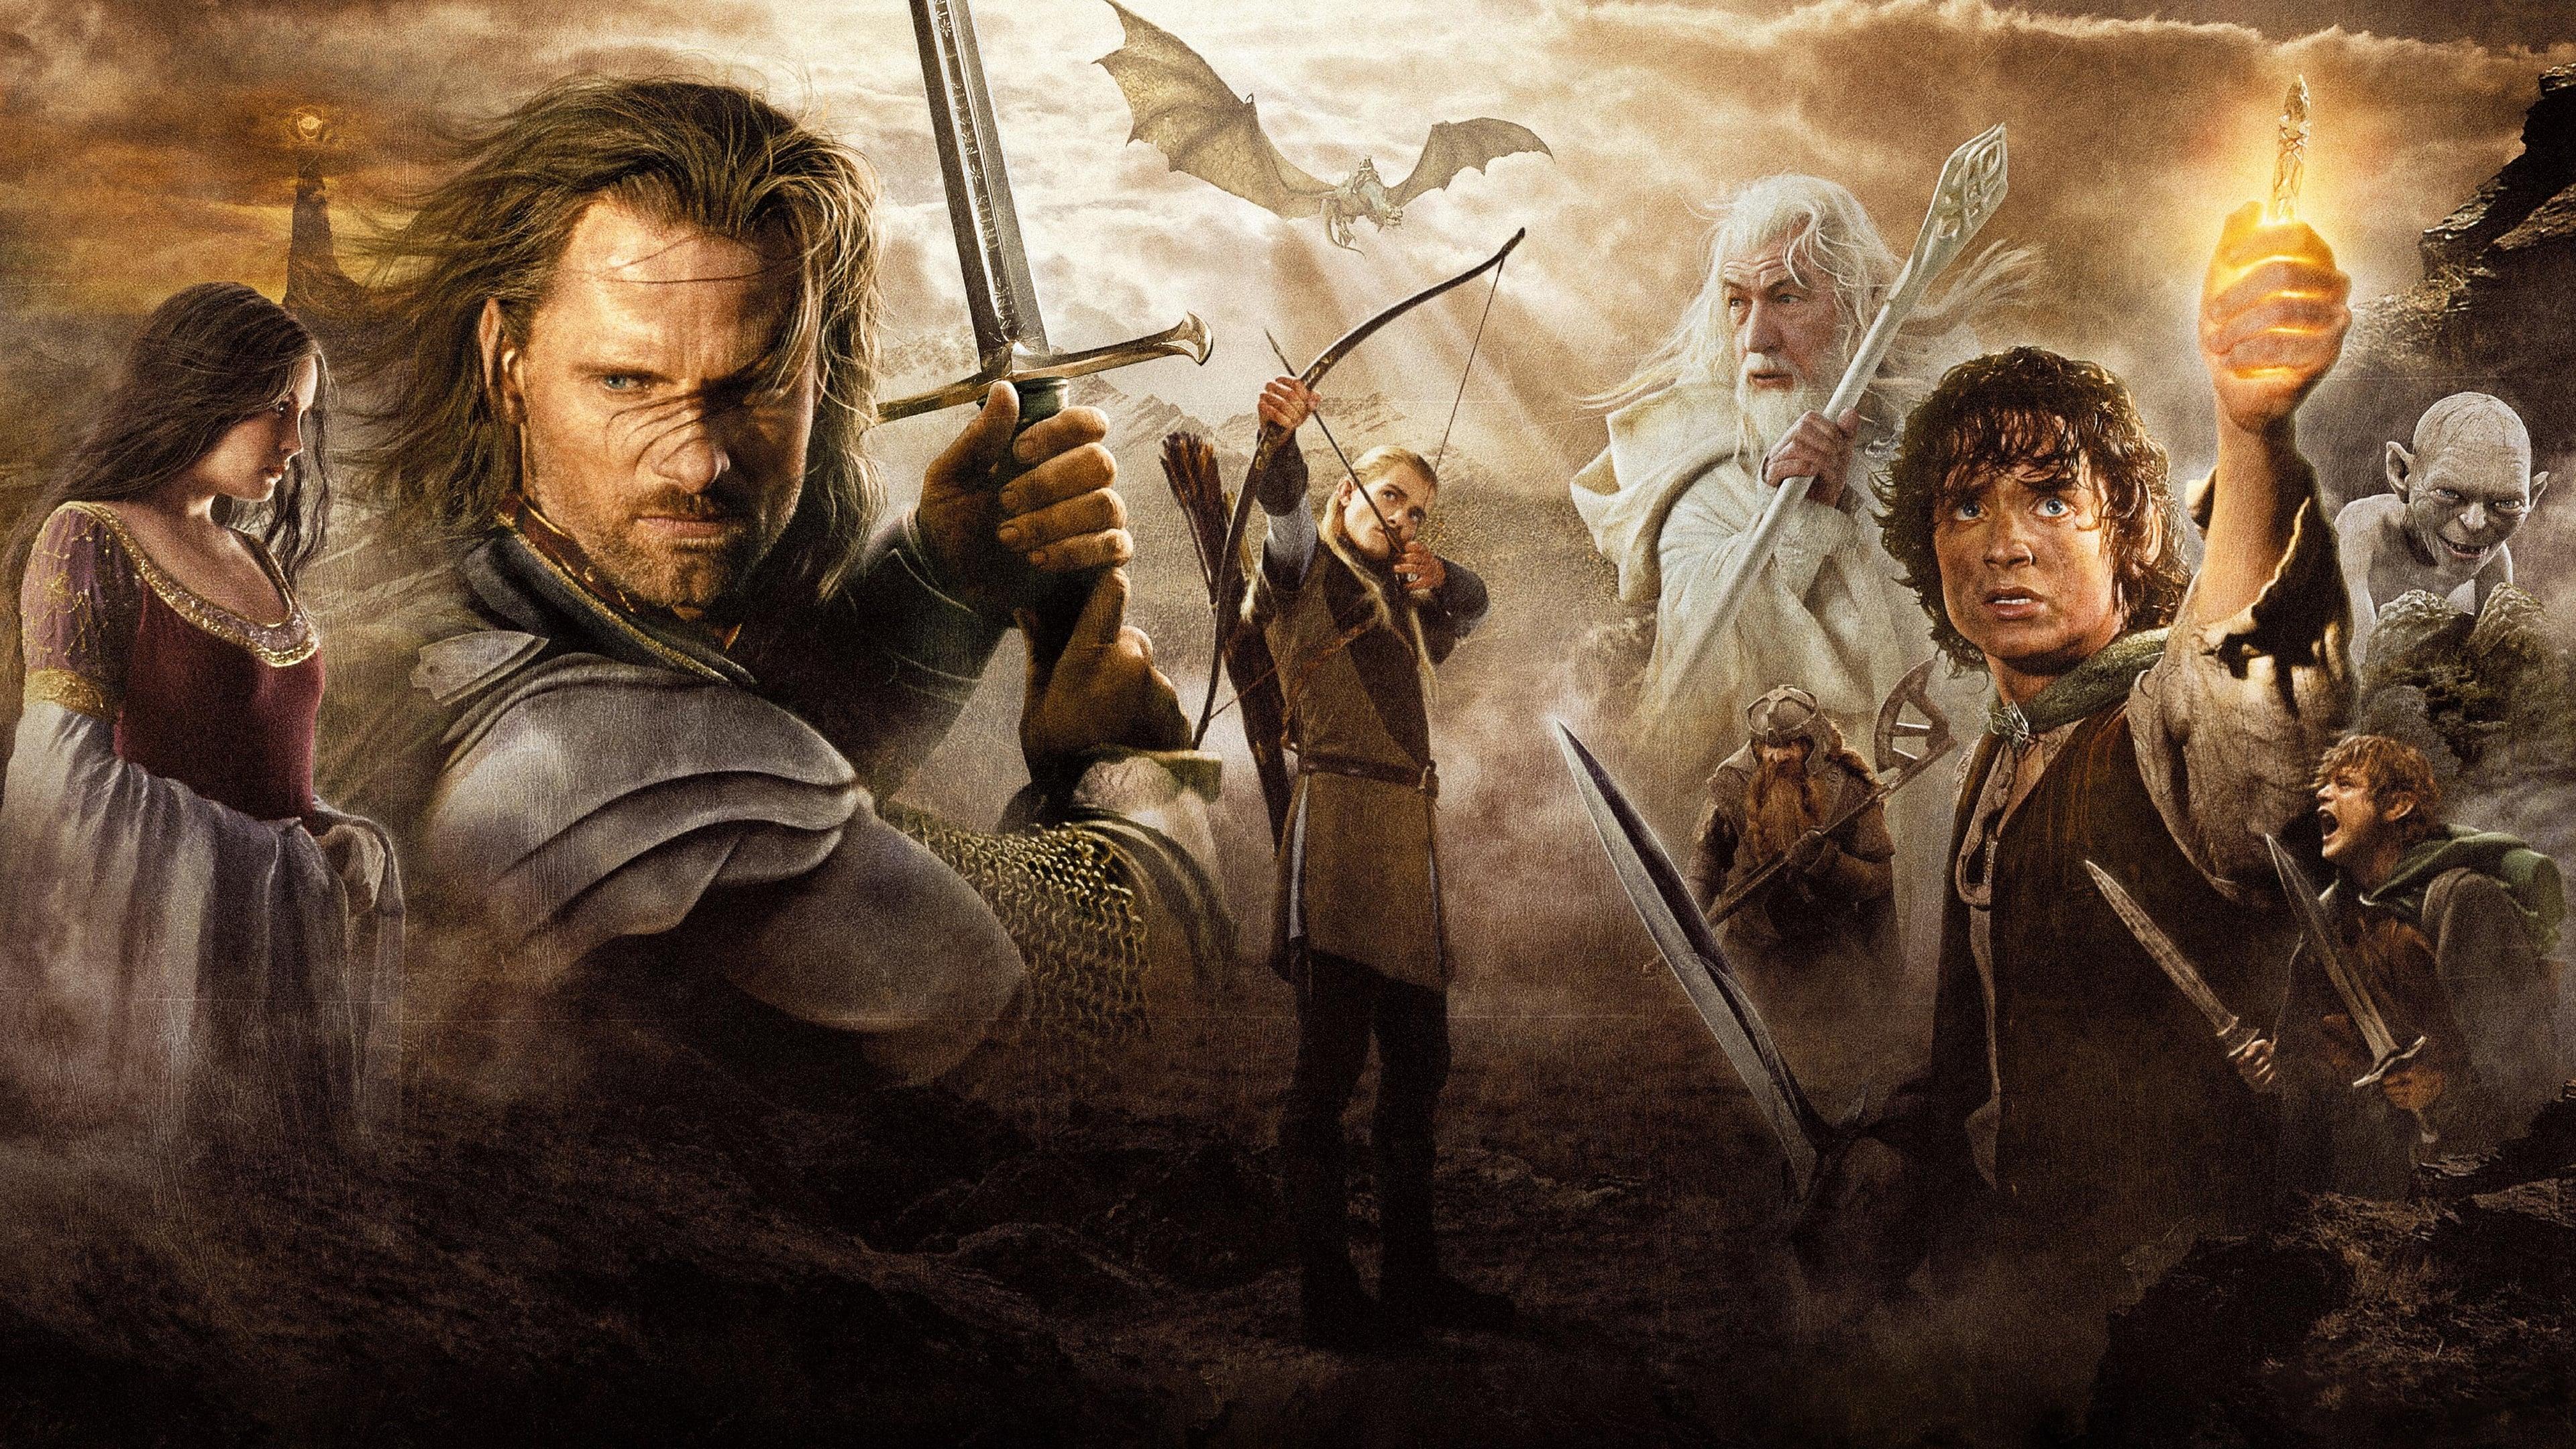 The Lord of the Rings: The Return of the King backdrop